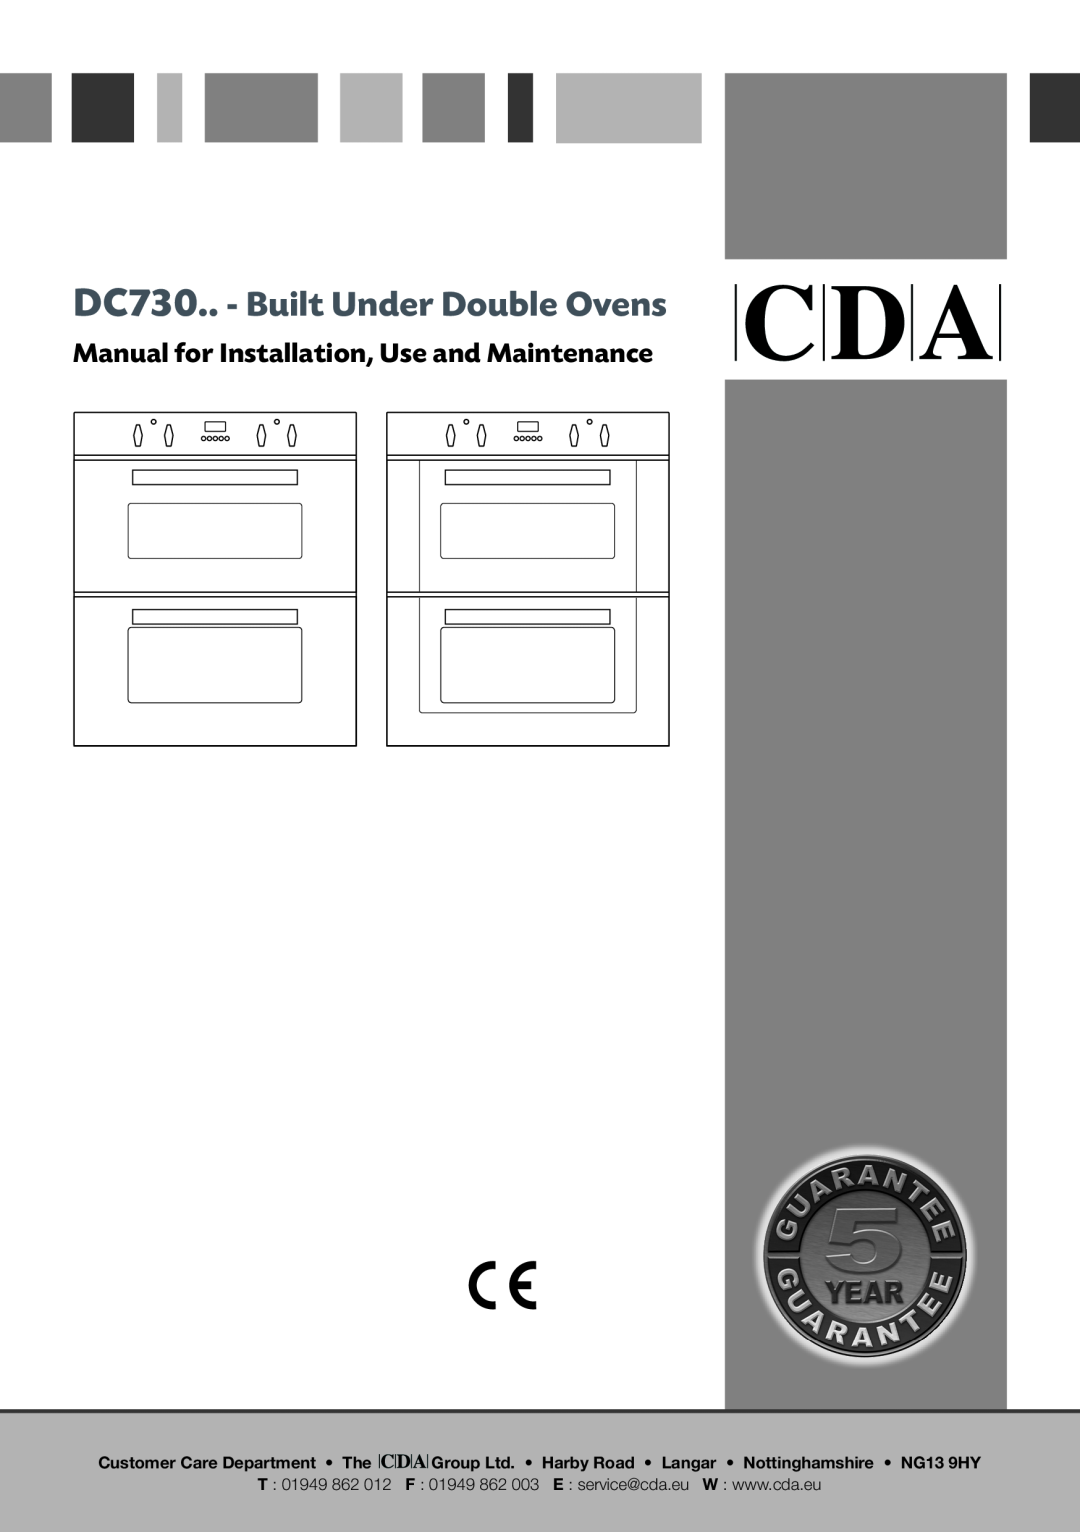 CDA manual DC730.. - Built Under Double Ovens, Manual for Installation, Use and Maintenance, T 01949 862 